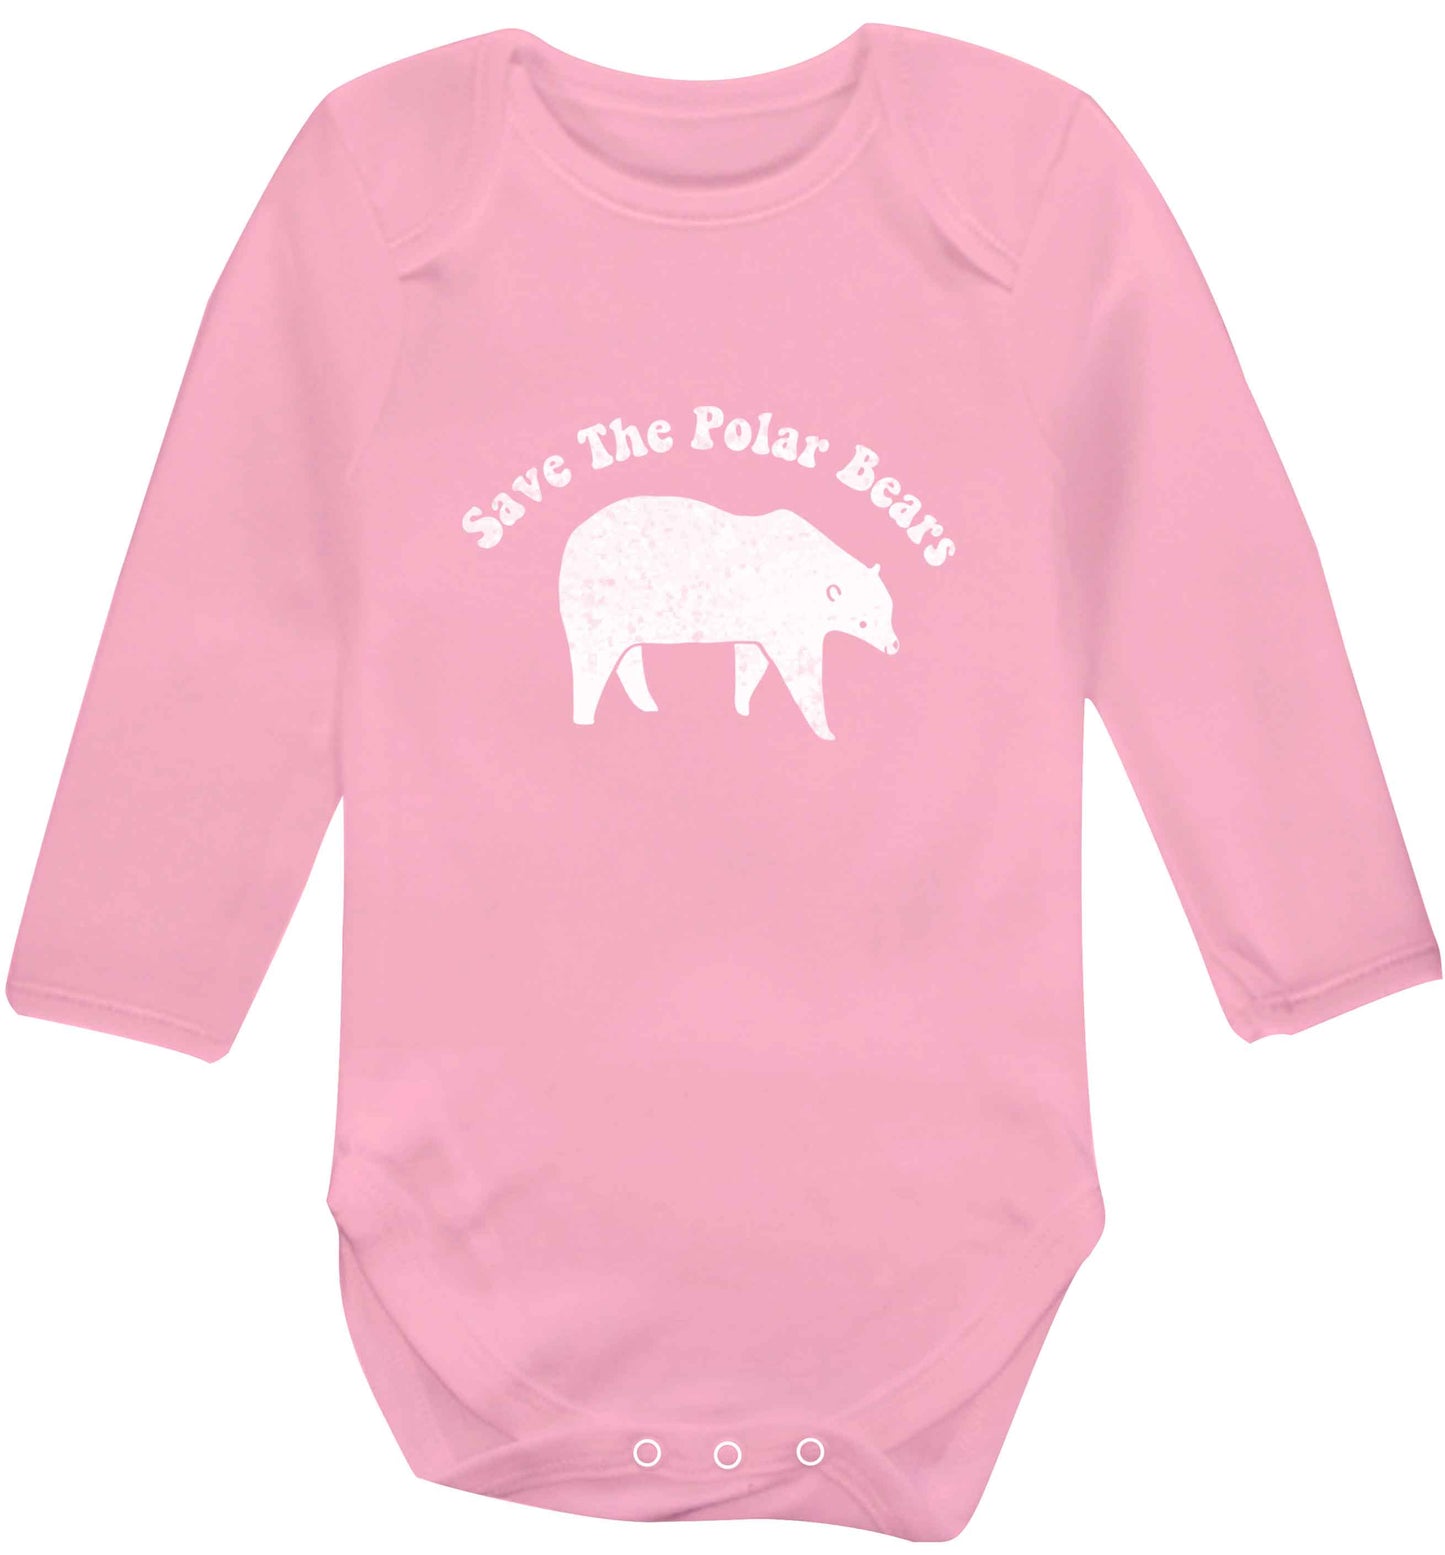 Save The Polar Bears baby vest long sleeved pale pink 6-12 months